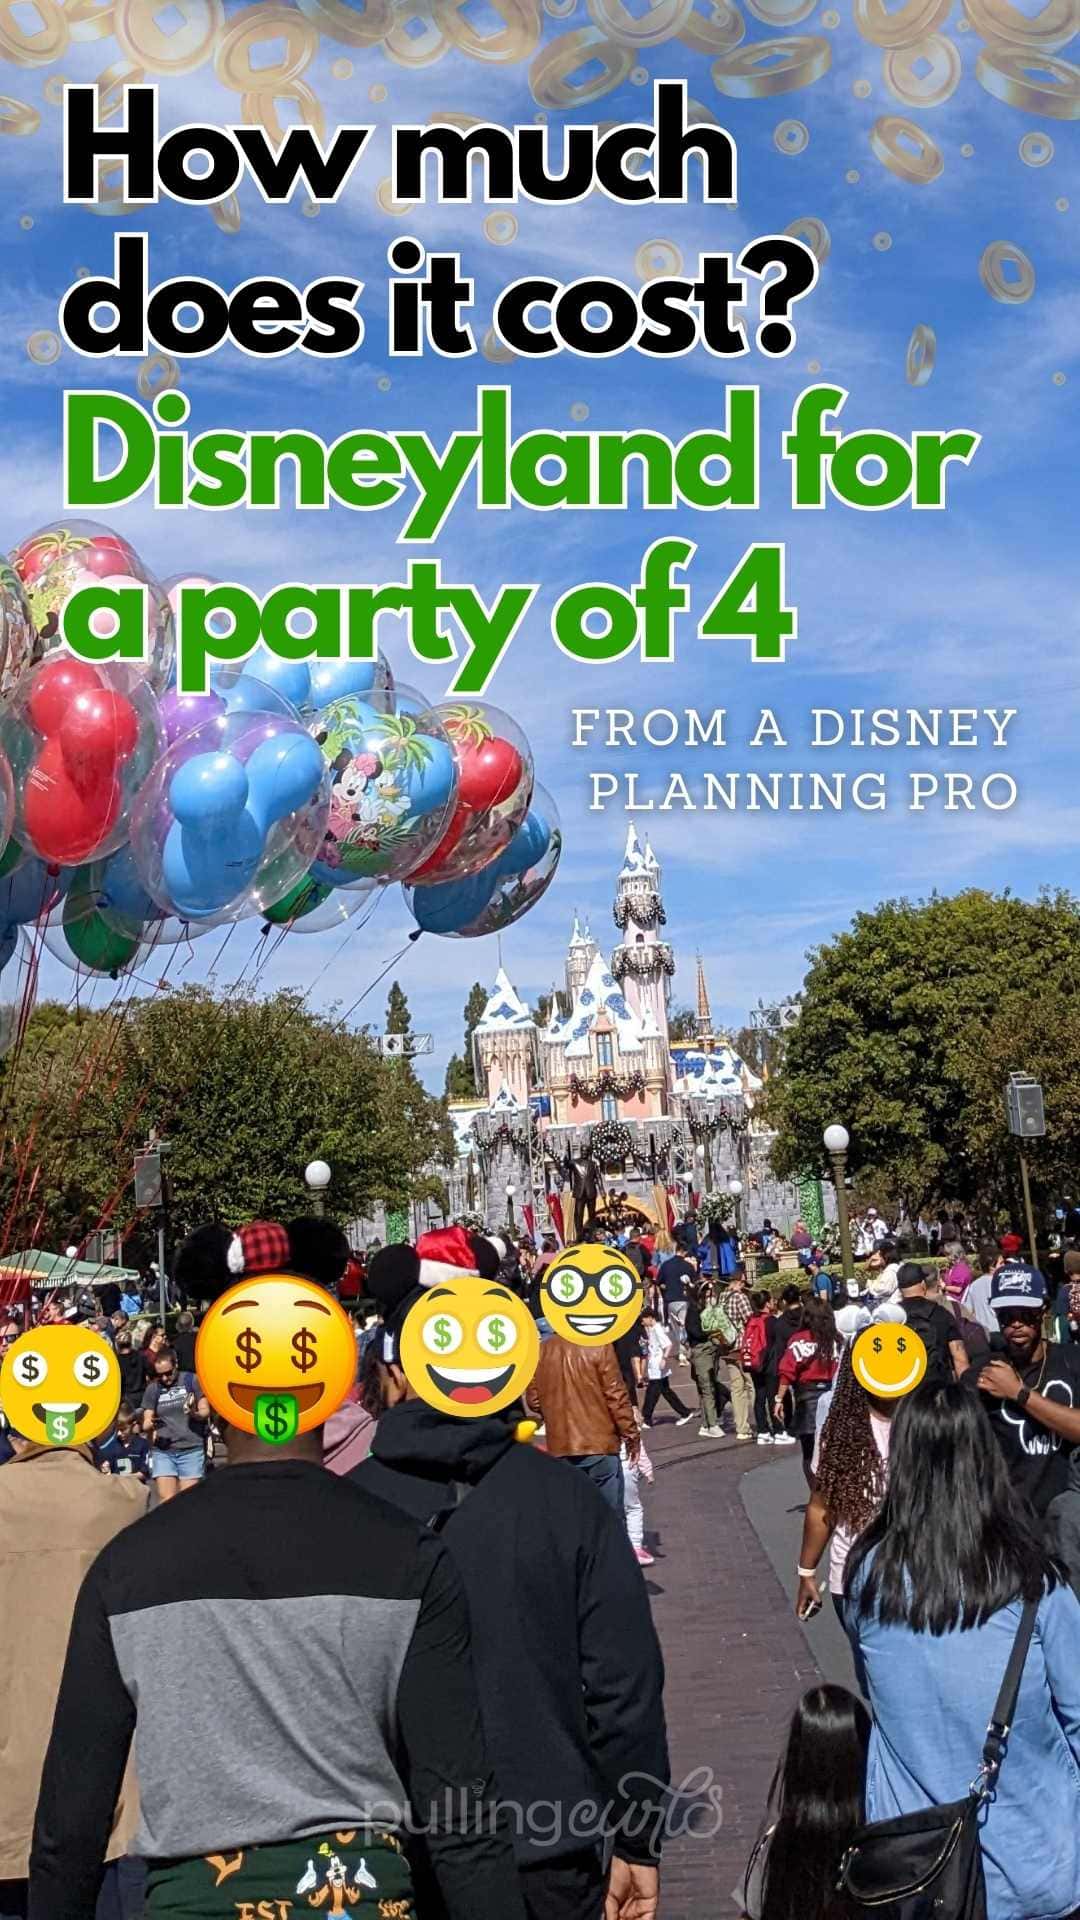 As a seasoned Disneyland expert, I've put together an informative guide on how to get the most bang for your buck on your Disneyland visit. From hotel expenses to ticket prices, food to souvenirs, we have all the information you need to budget effectively. Pin this for tips on how to stretch your dollars on your dream vacation! via @pullingcurls